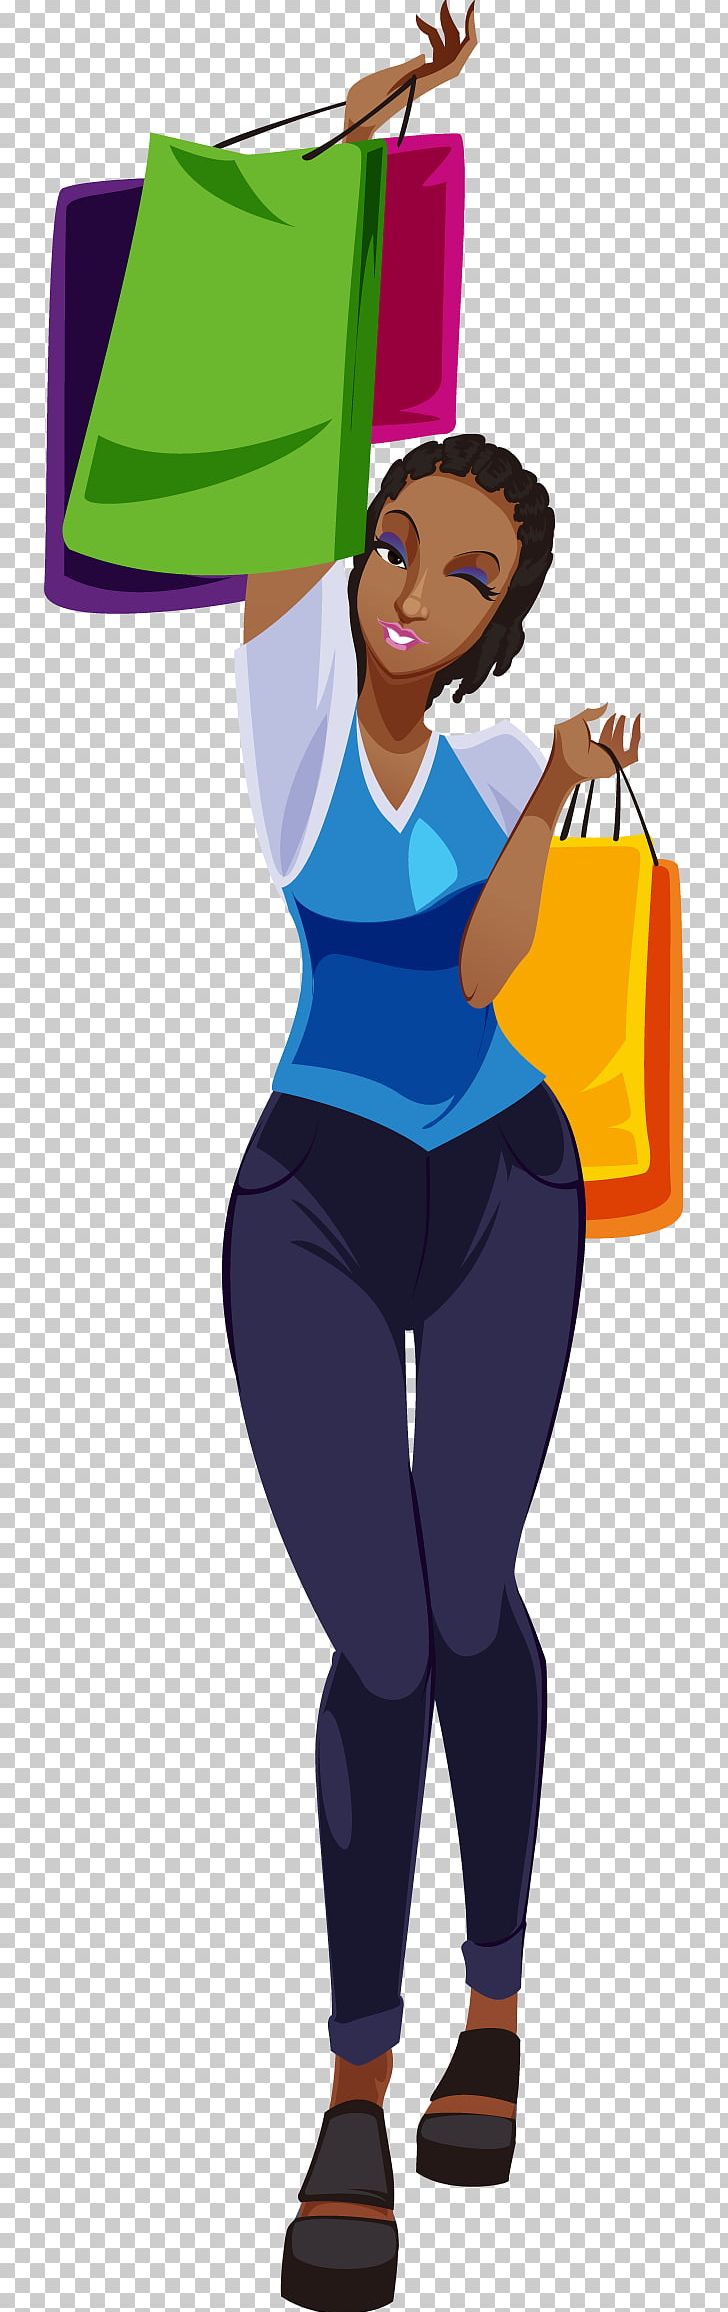 Shopping Consumer PNG, Clipart, Art, Bag, Bags, Bag Vector, Business Woman Free PNG Download